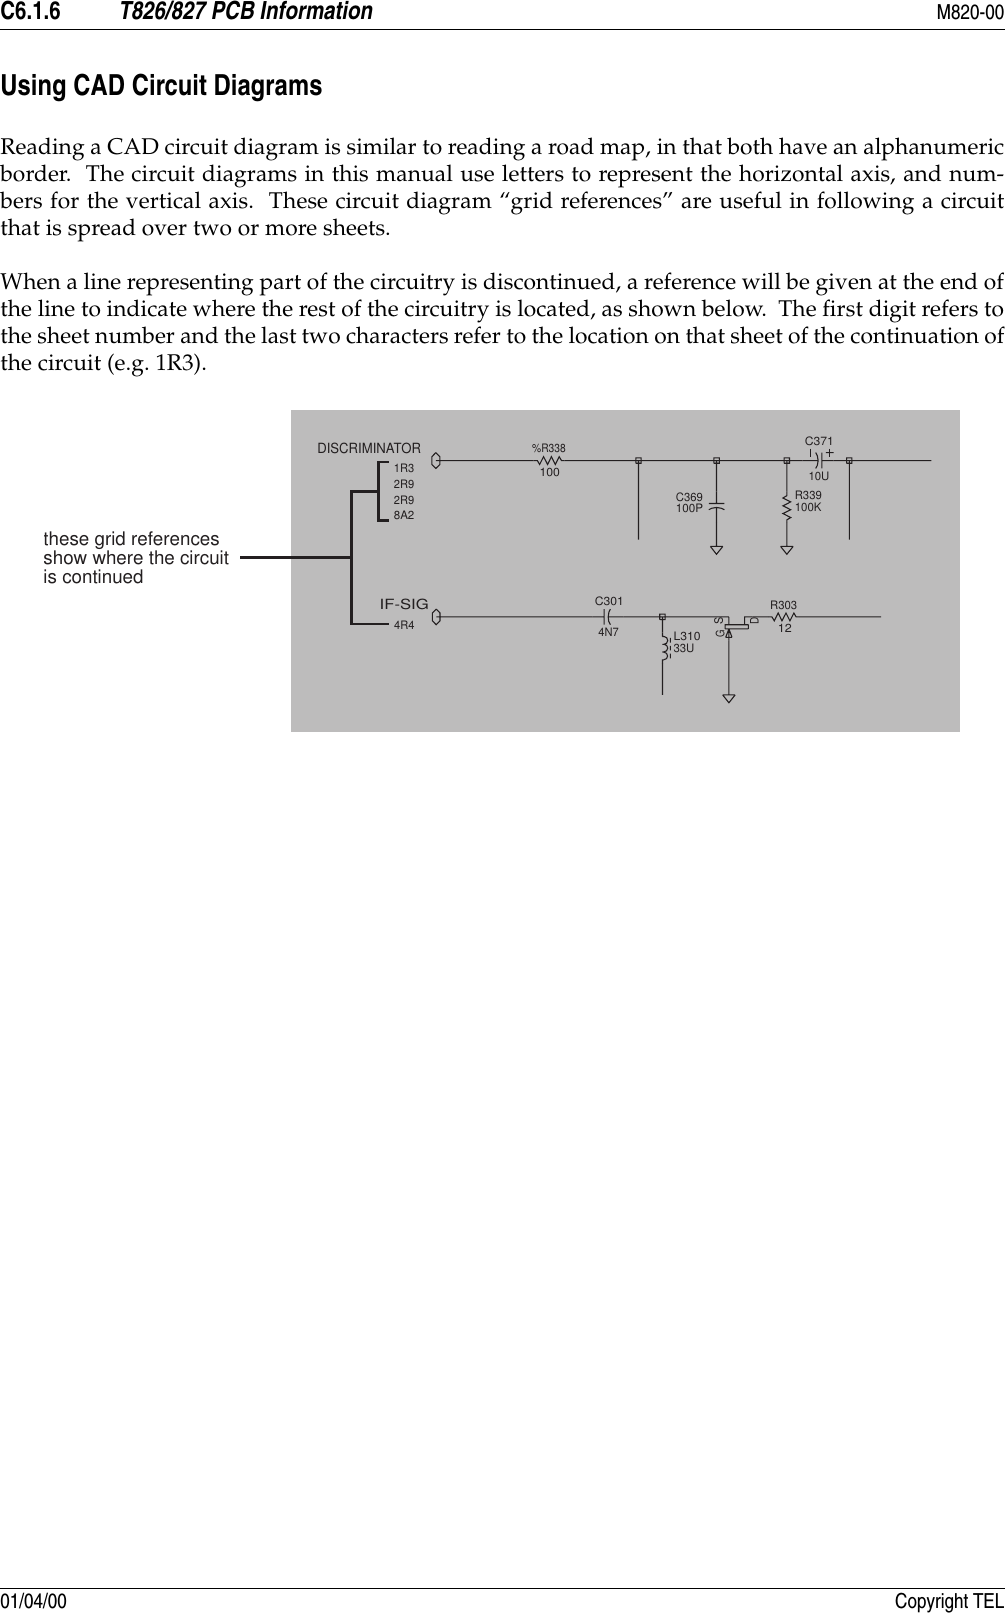 C6.1.6 T826/827 PCB Information M820-0001/04/00 Copyright TELUsing CAD Circuit DiagramsReading a CAD circuit diagram is similar to reading a road map, in that both have an alphanumericborder.  The circuit diagrams in this manual use letters to represent the horizontal axis, and num-bers for the vertical axis.  These circuit diagram “grid references” are useful in following a circuitthat is spread over two or more sheets.When a line representing part of the circuitry is discontinued, a reference will be given at the end ofthe line to indicate where the rest of the circuitry is located, as shown below.  The first digit refers tothe sheet number and the last two characters refer to the location on that sheet of the continuation ofthe circuit (e.g. 1R3).C3014N7R30312DSGL31033UIF-SIG4R4C369100PC37110UR339100K%R338100DISCRIMINATOR1R32R92R98A2these grid referencesshow where the circuitis continued